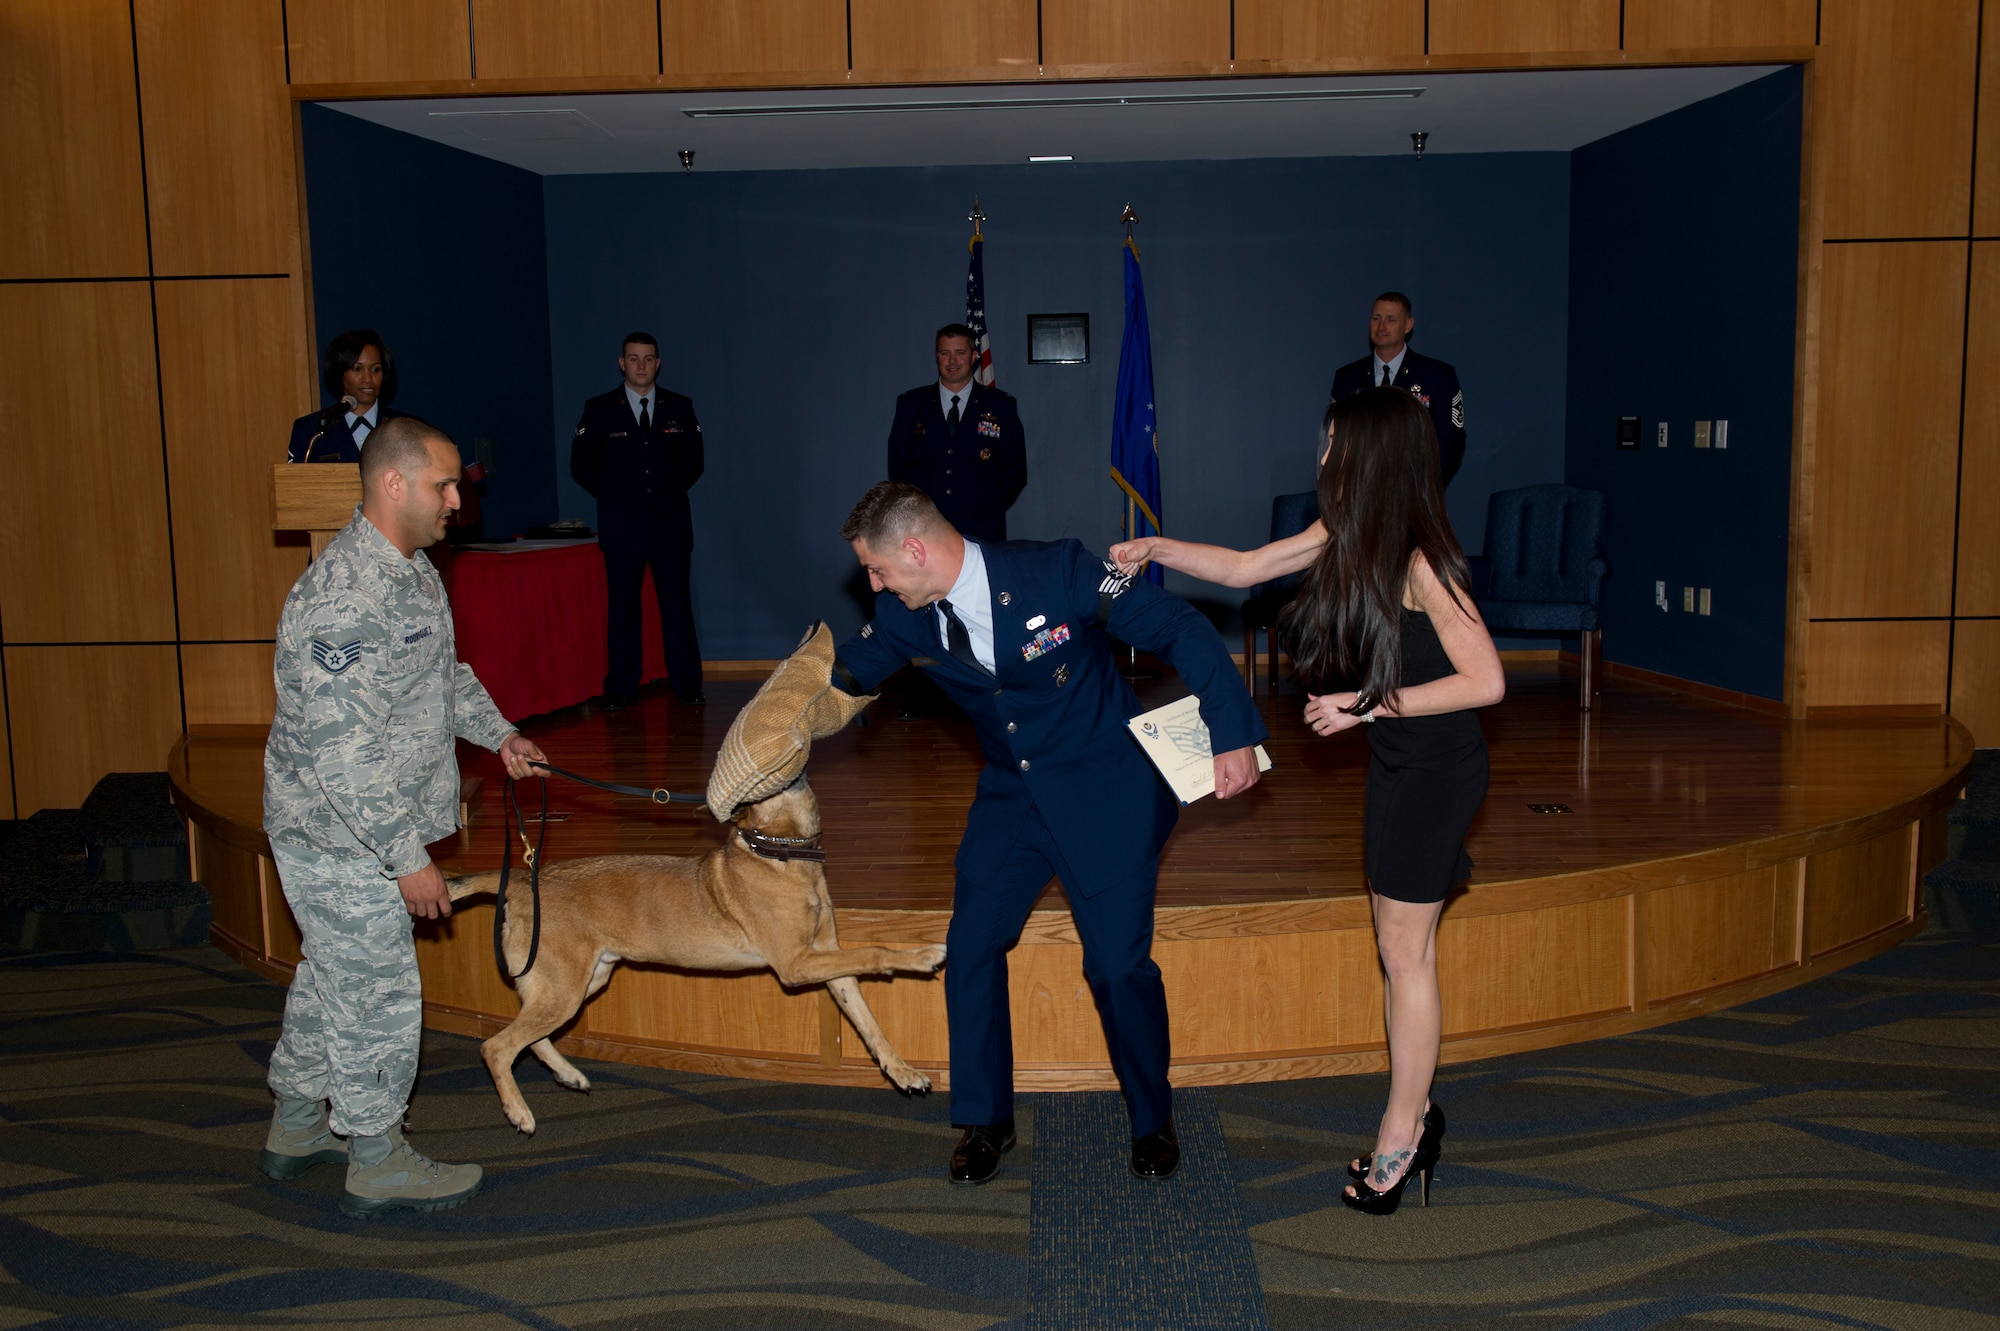 Staff Sgt. Justin Paczesny, 325th Security Forces Squadron military working dog handler, has his fiancée, Andrea Plumb, and his supervisor’s retired military working dog, Arco, tack on his staff sergeant stripes Feb. 28 at the March Enlisted Promotion Ceremony at Horizons Community Center. (U.S. Air Force photo by Senior Airman Christopher Reel)